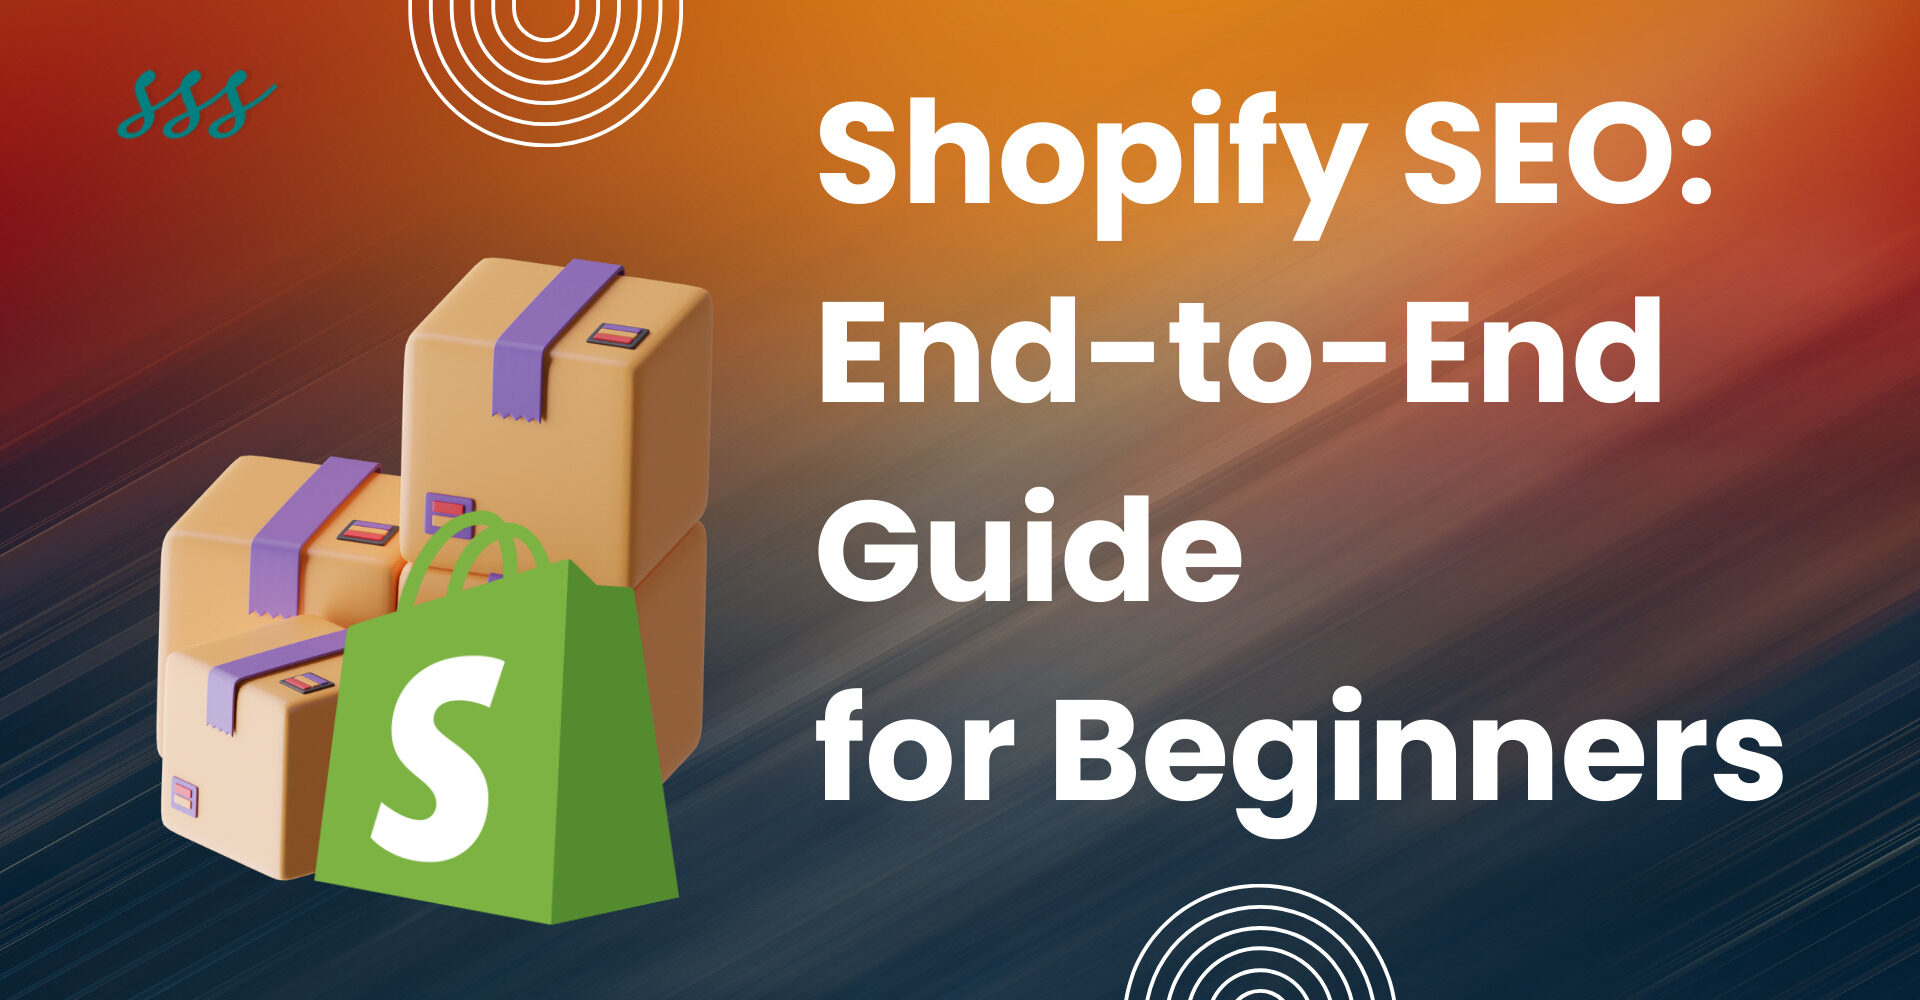 Shopify SEO End-to-End Guide for Beginners